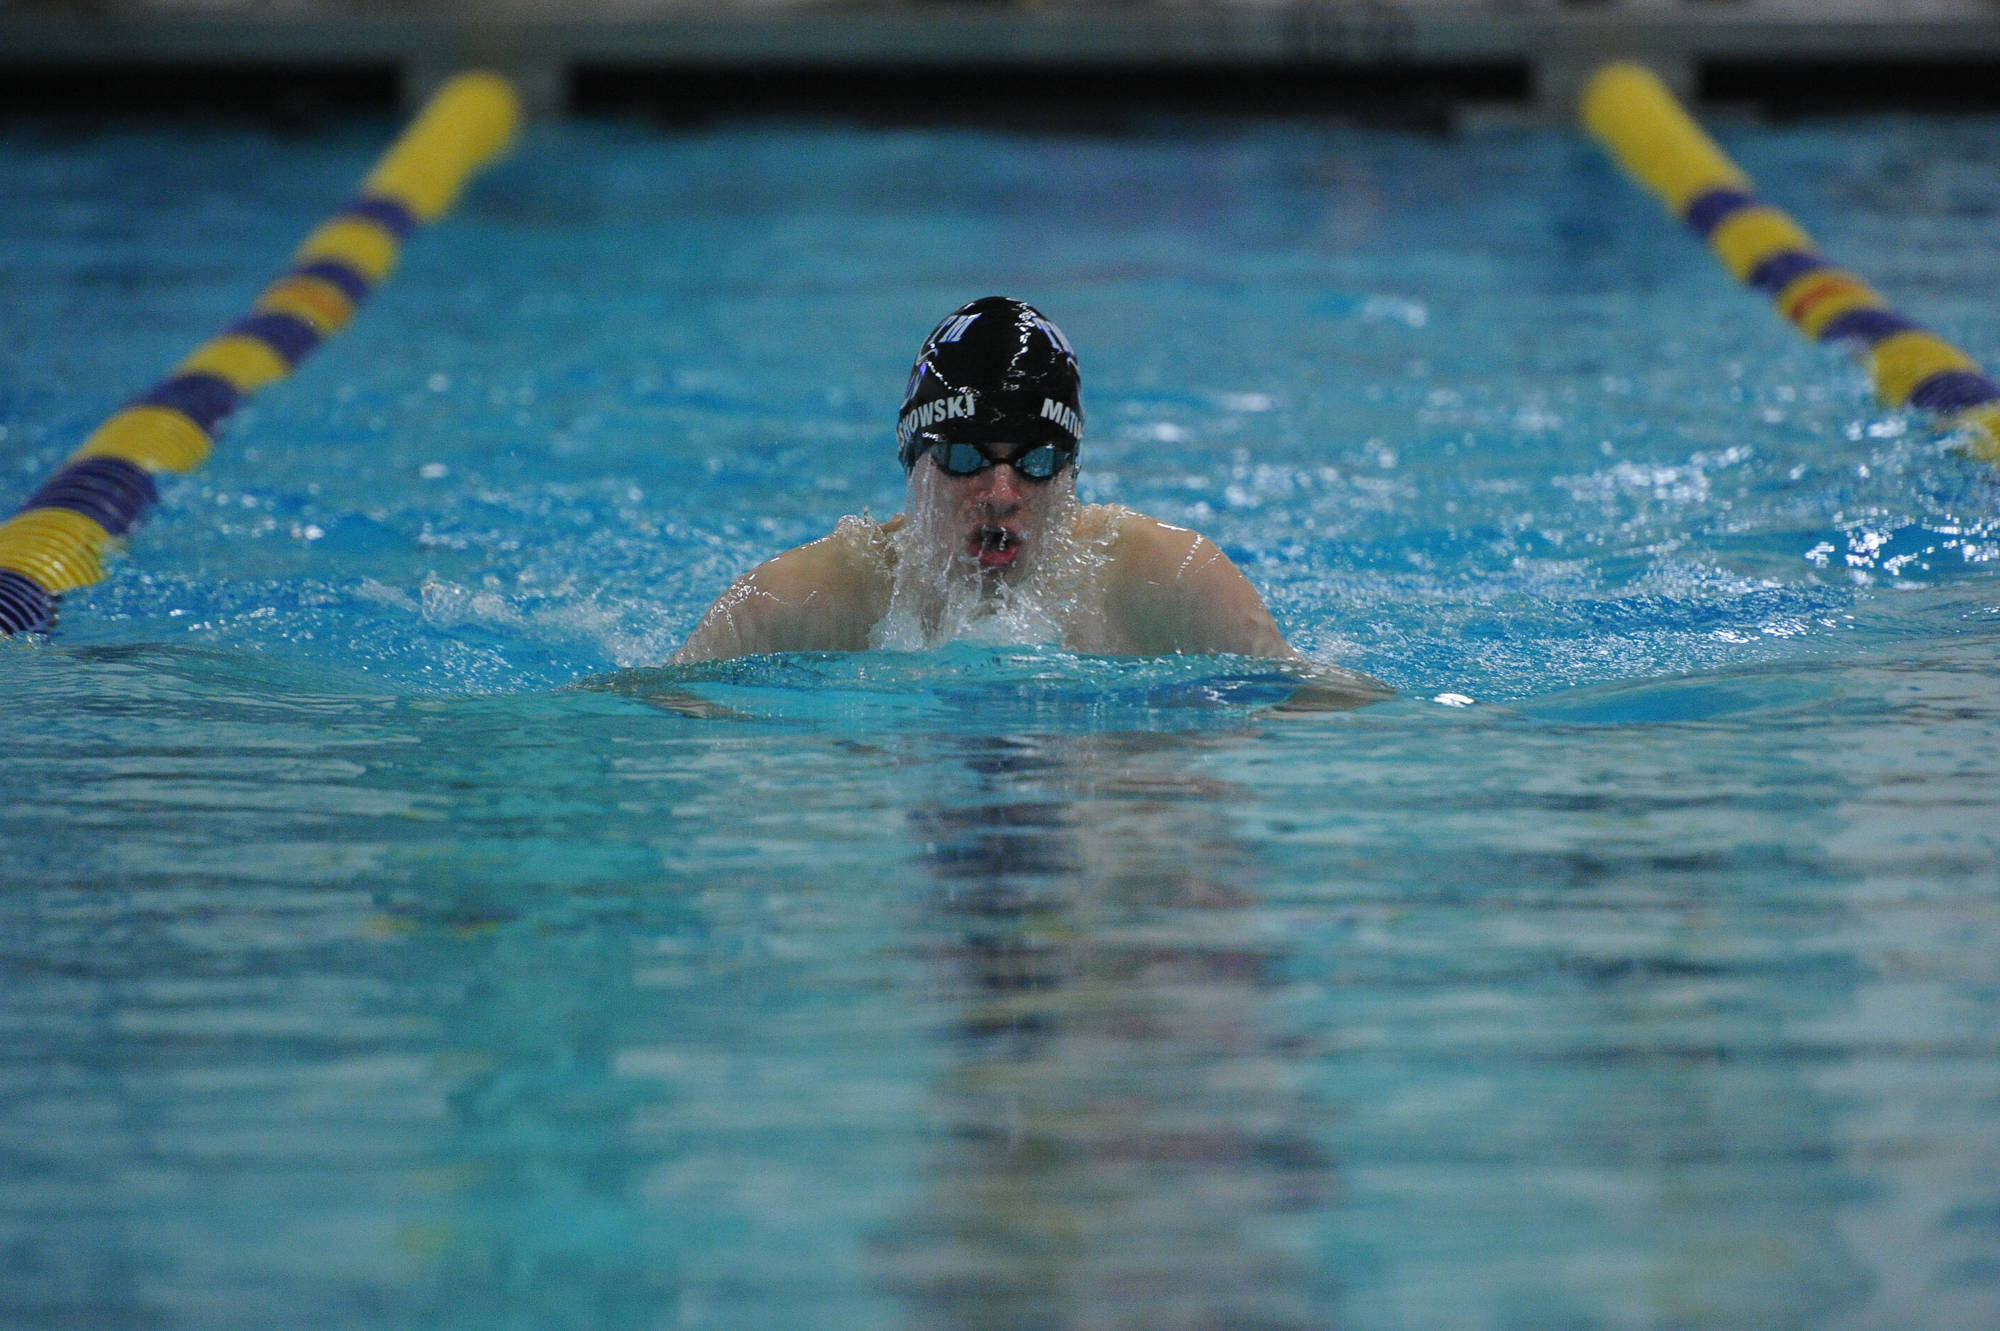 Thunder Mountain High School senior Raymie Matiashowski swims in the finals of the 100-yard breaststroke at the ASAA/First National Bank Alaska State Swim and Dive Championships on Saturday, Nov. 3, 2018. He finished in fifth place with a time of 1:01.64. (Michael Dinneen | For the Juneau Empire)